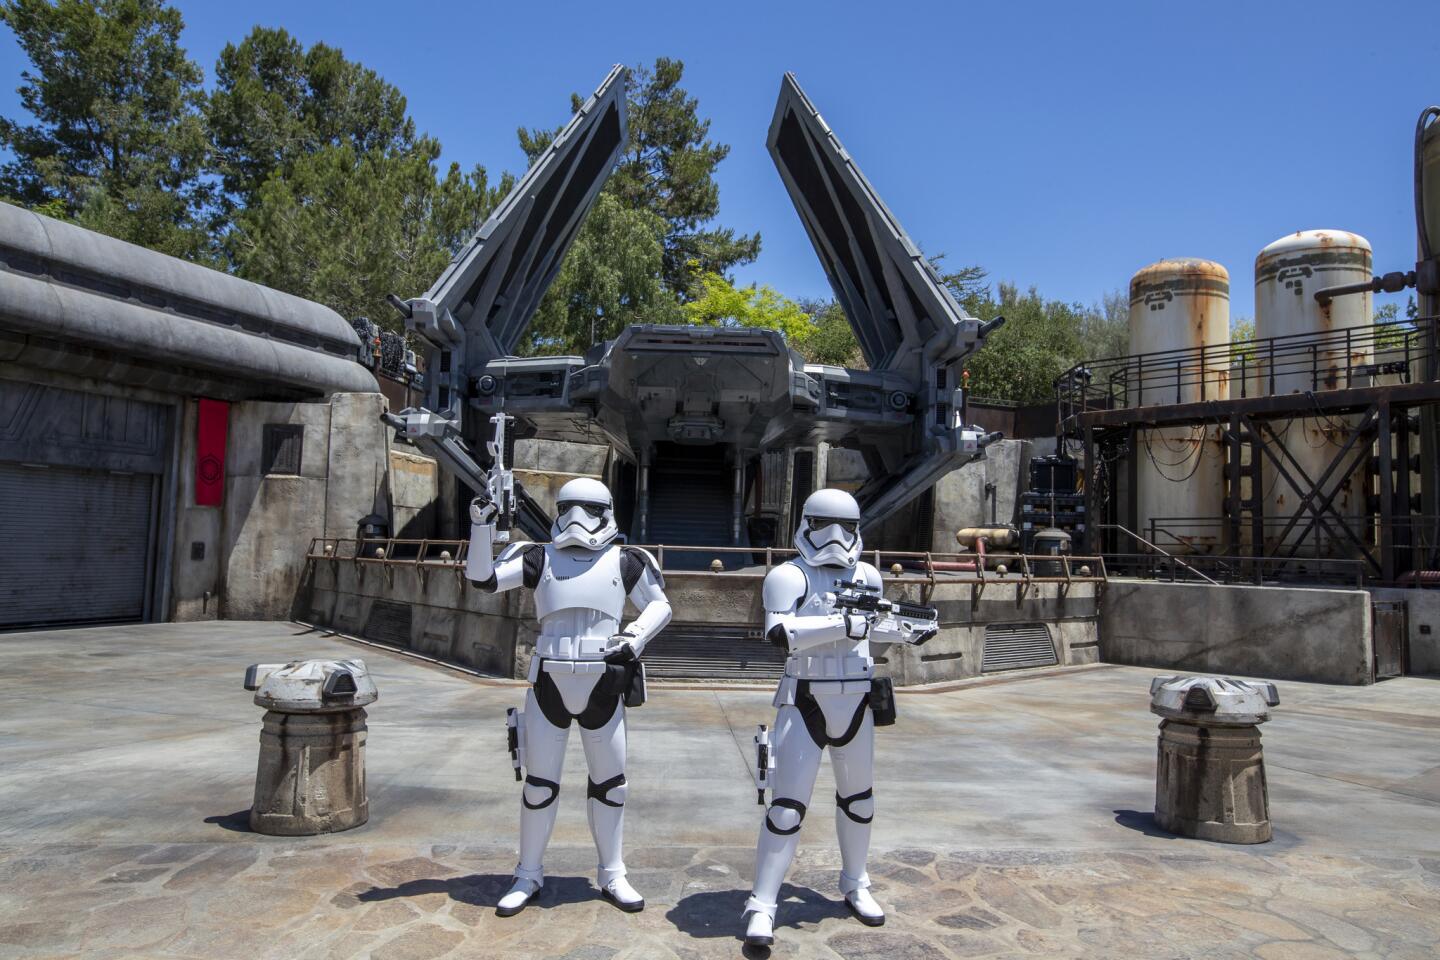 Storm Troopers patrol The First Order Outpost where the Tie Echelon fighter ship is parked as media members get a preview during the Star Wars: Galaxy's Edge Media Preview event at the Disneyland Resort in Anaheim, Calif., on May 29, 2019. (Allen J. Schaben / Los Angeles Times)